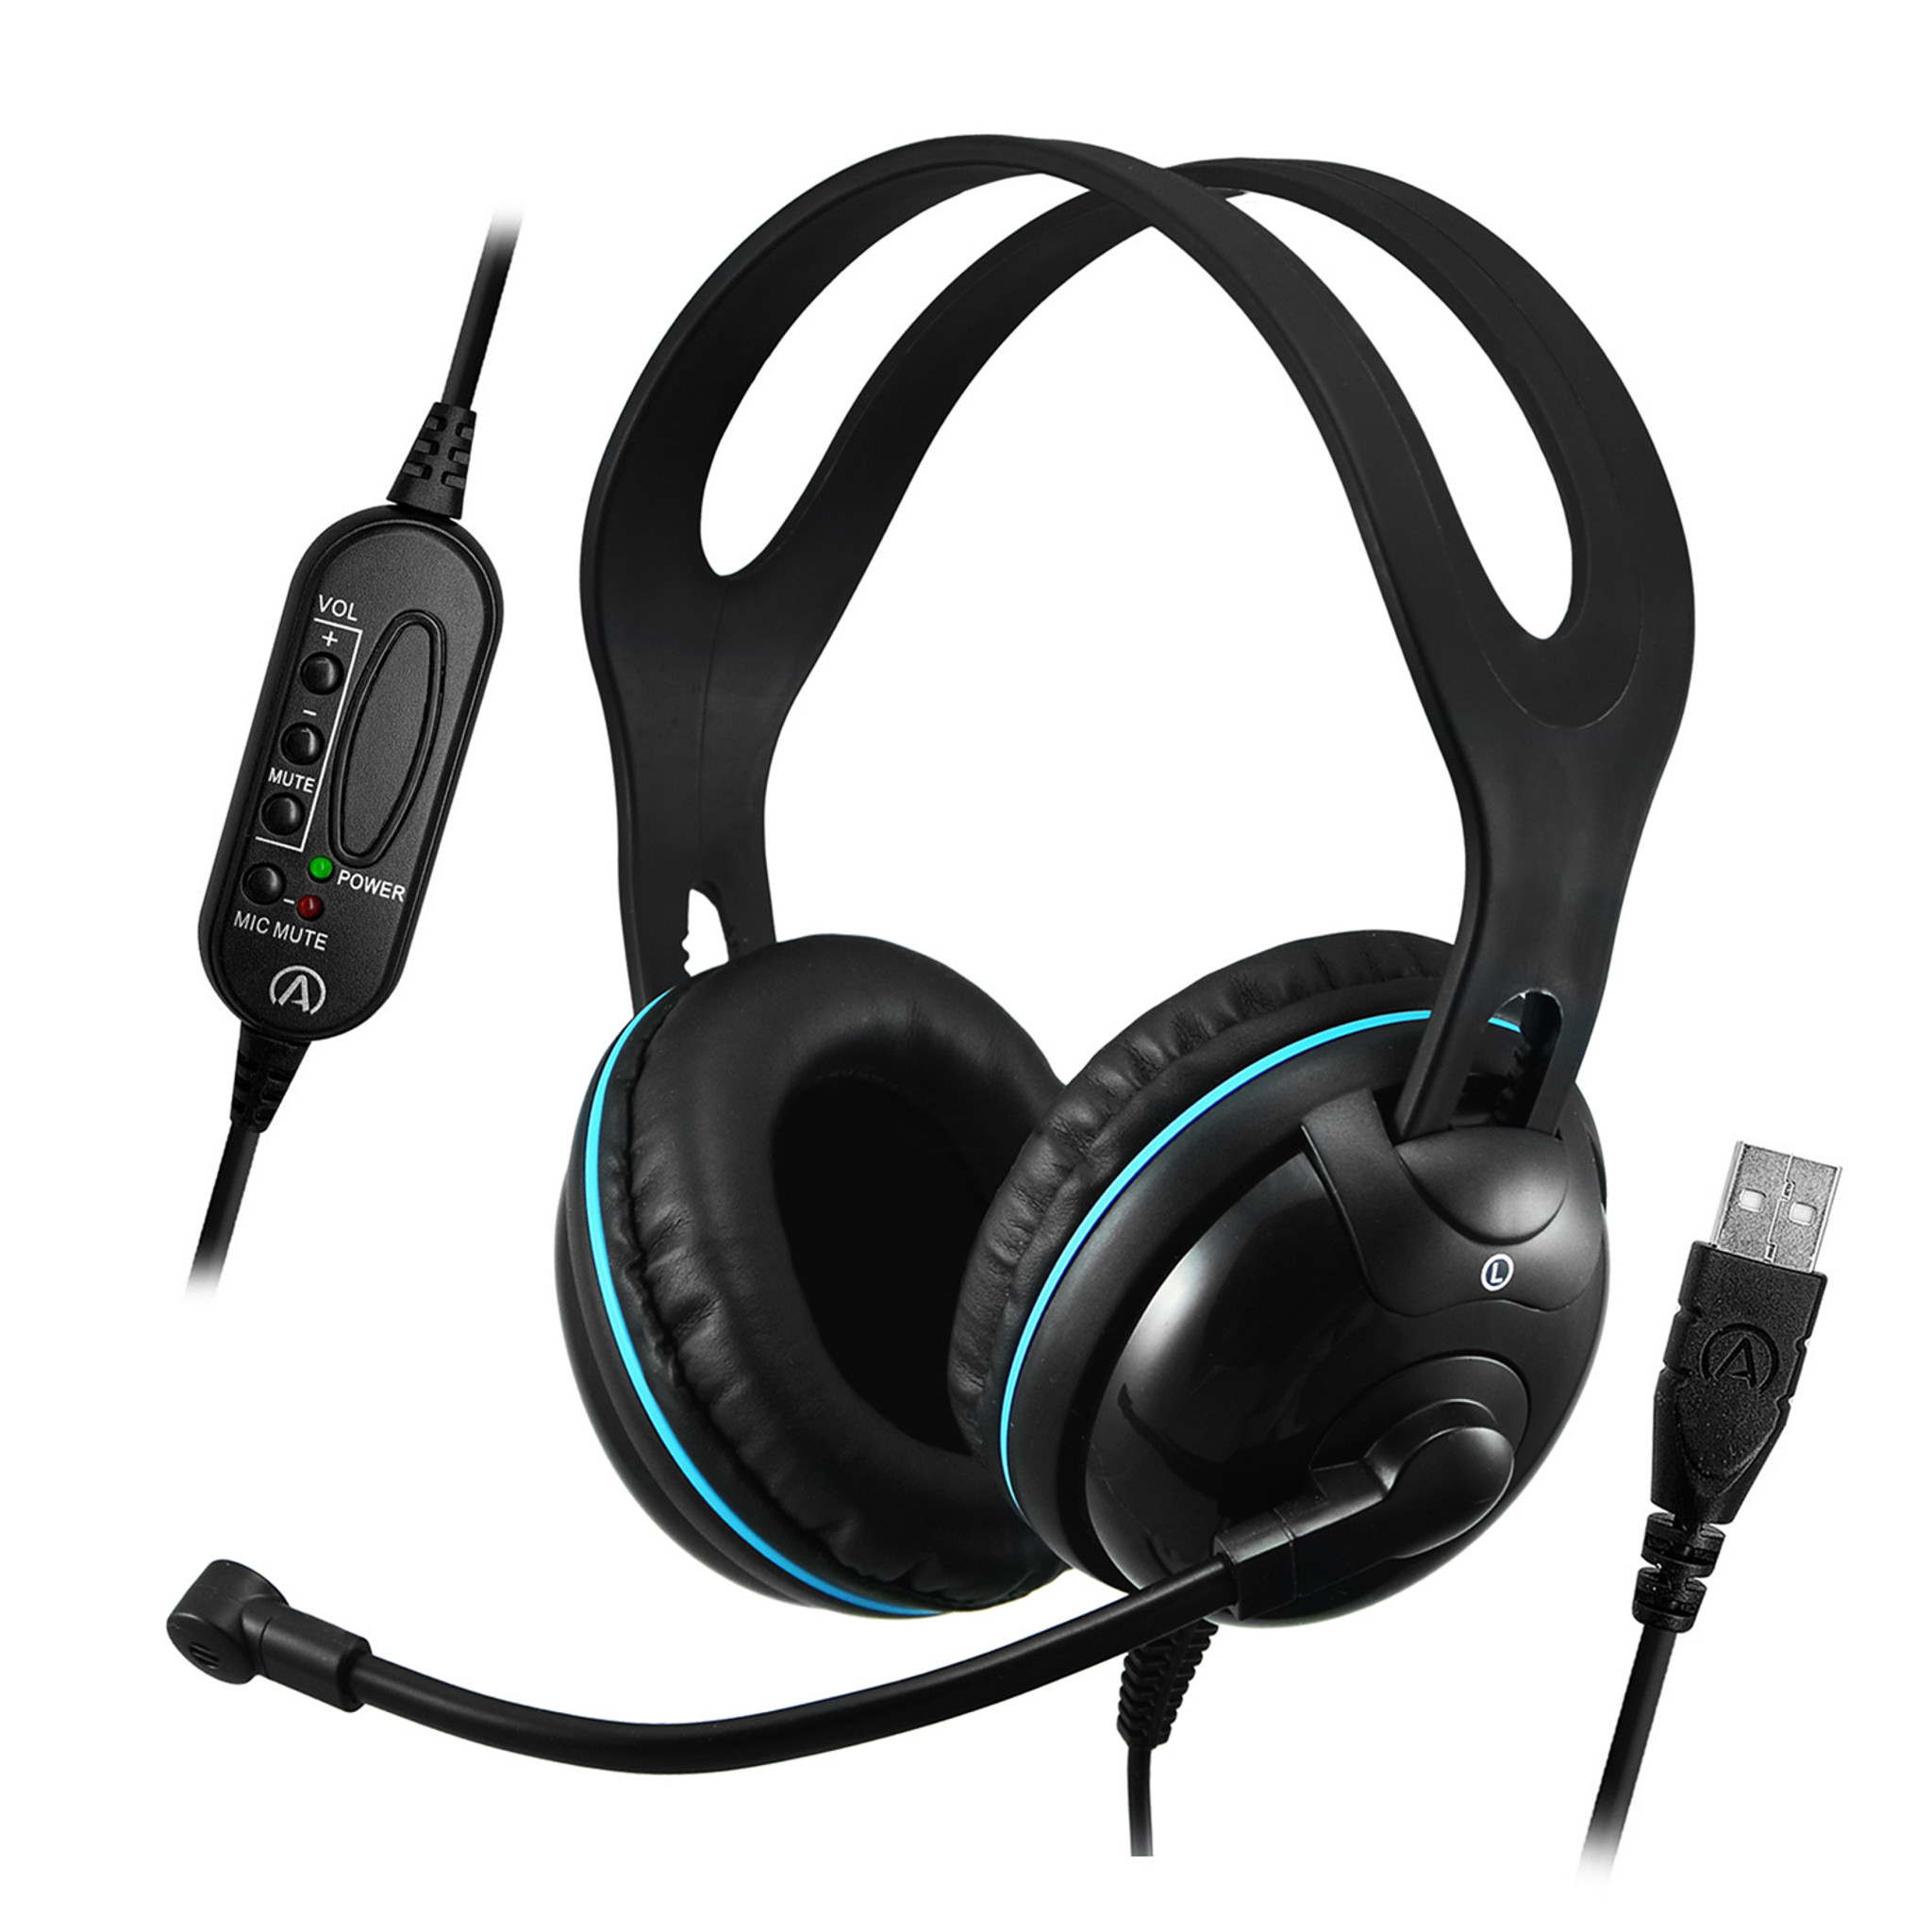 NC-455VM USB Over-Ear Stereo USB Headset with In-line Volume and Mute Controls - Communications